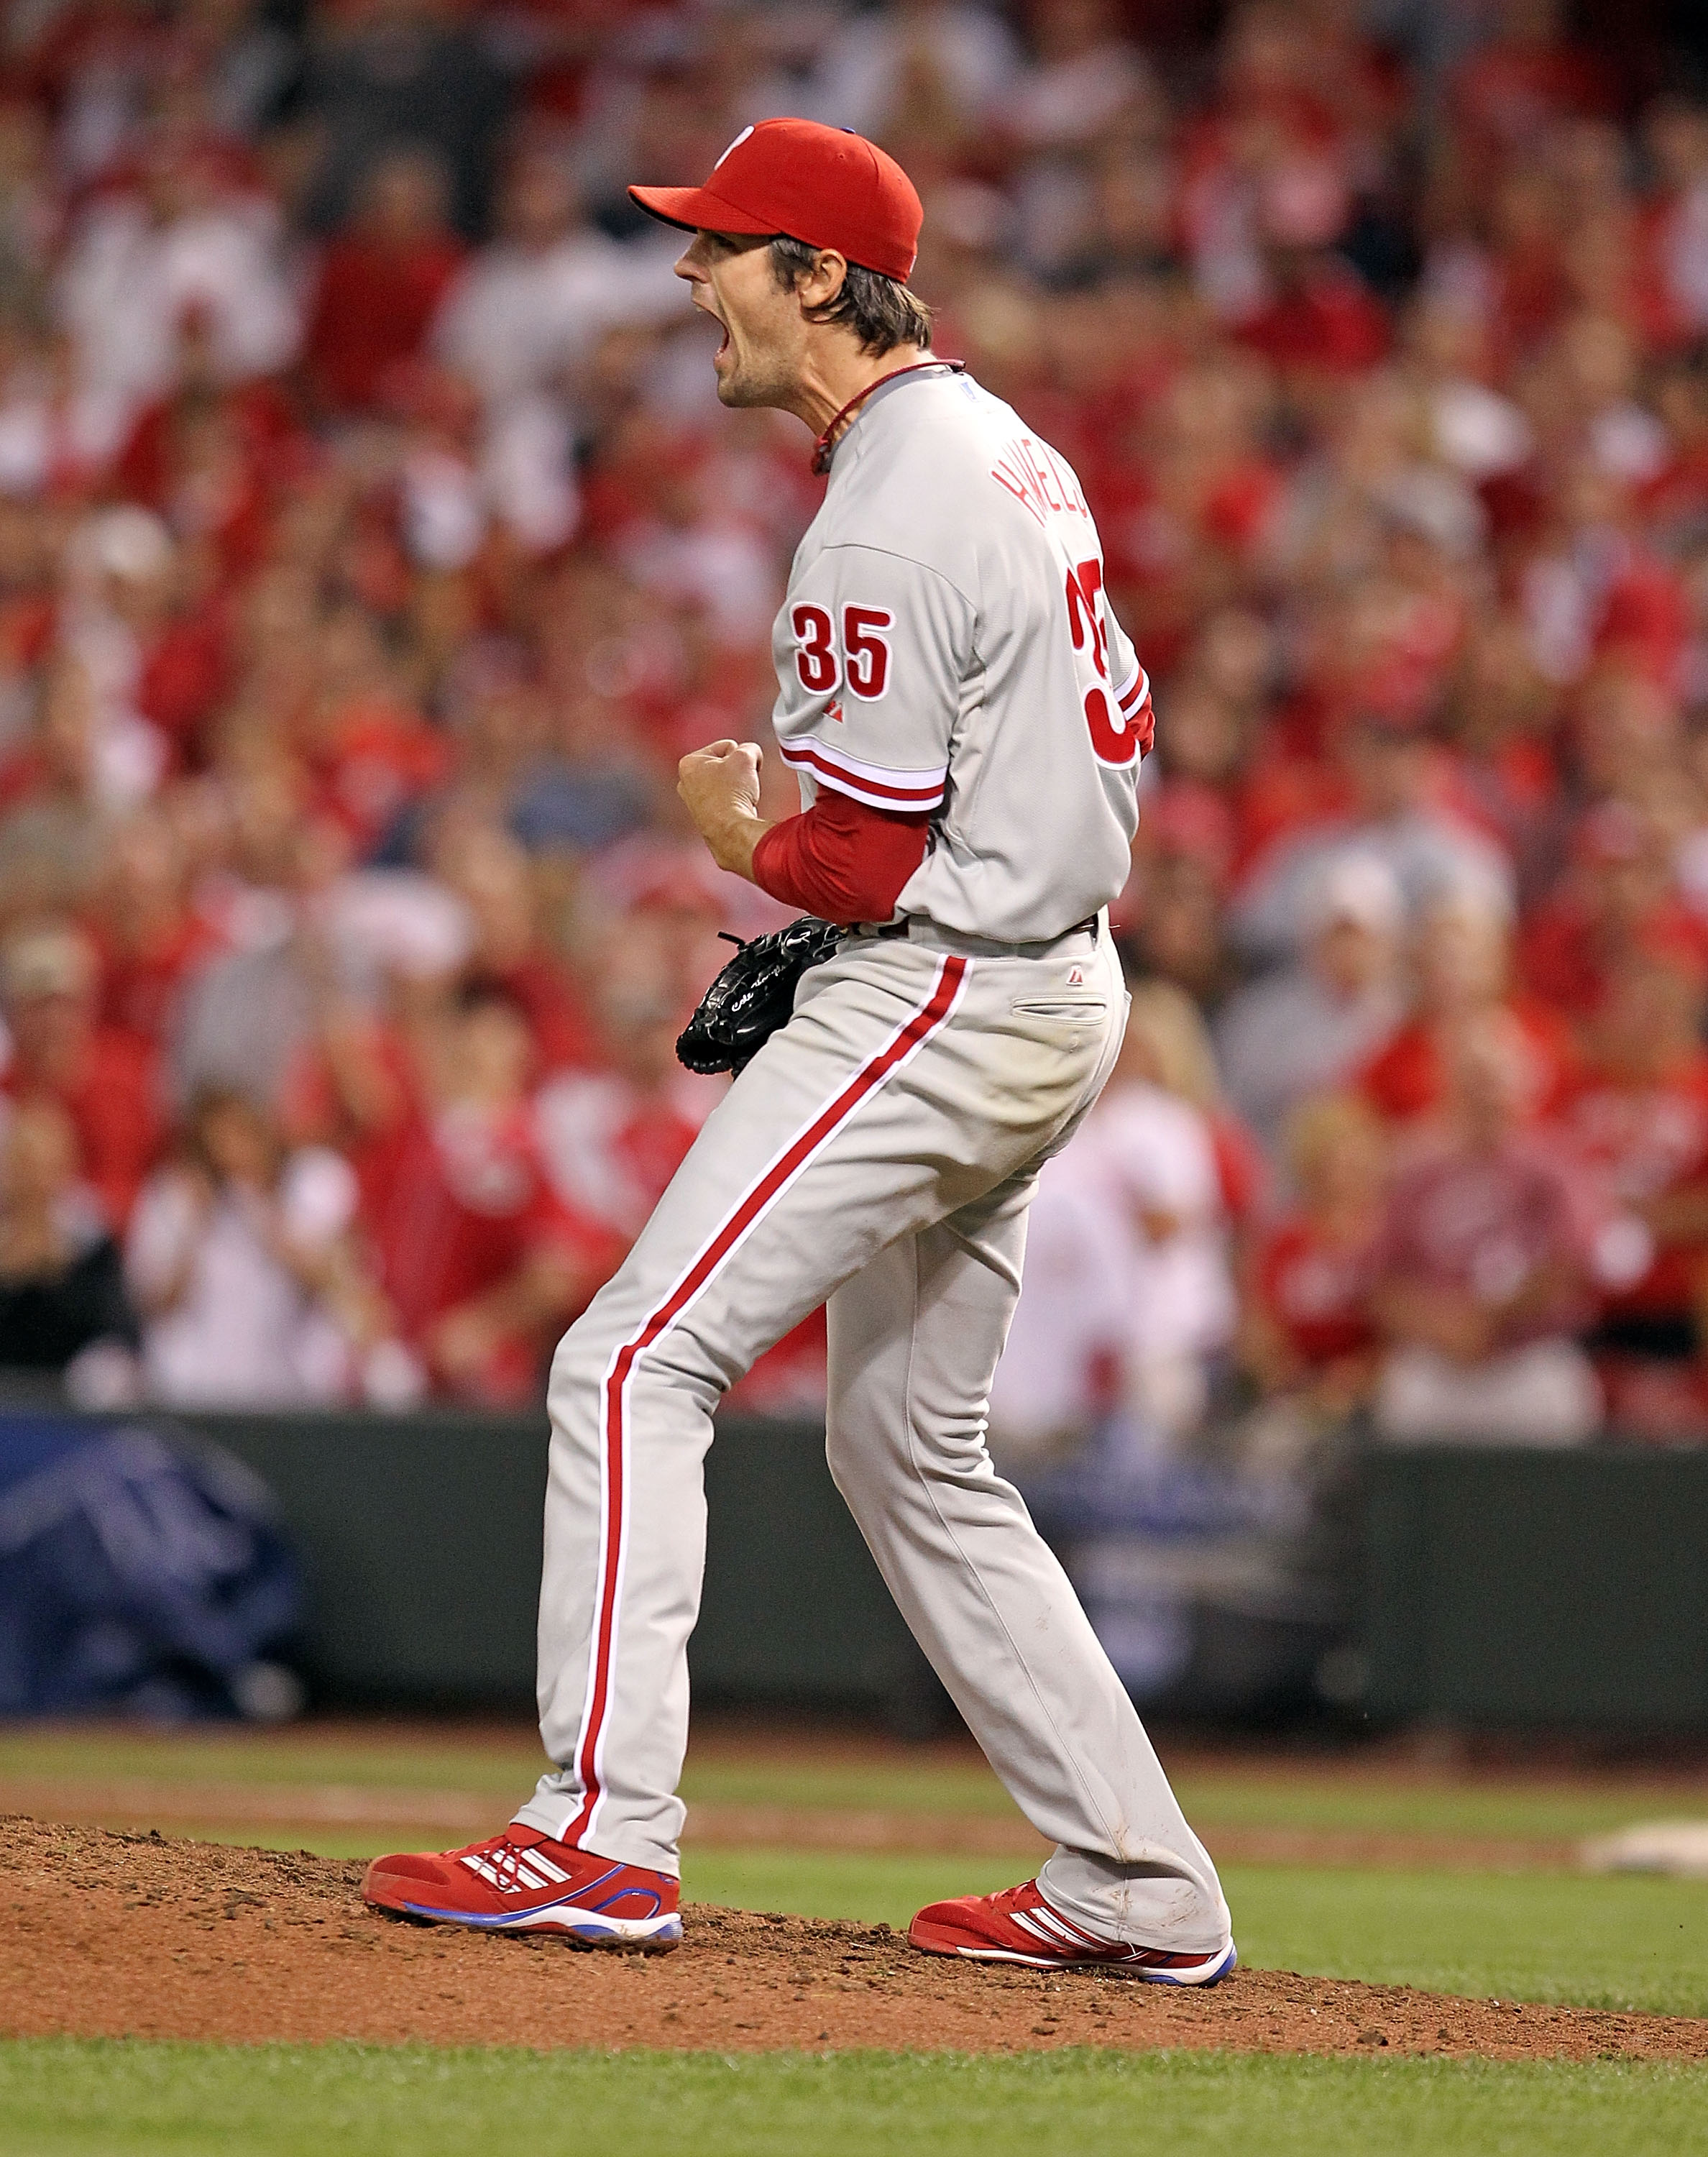 CINCINNATI - OCTOBER 10:  Cole Hamels #35 of the Philadelphia Phillies celebrates a complete game shut-out against the Cincinnati Reds during Game 3 of the NLDS at Great American Ball Park on October 10, 2010 in Cincinnati, Ohio.The Phillies defeated the